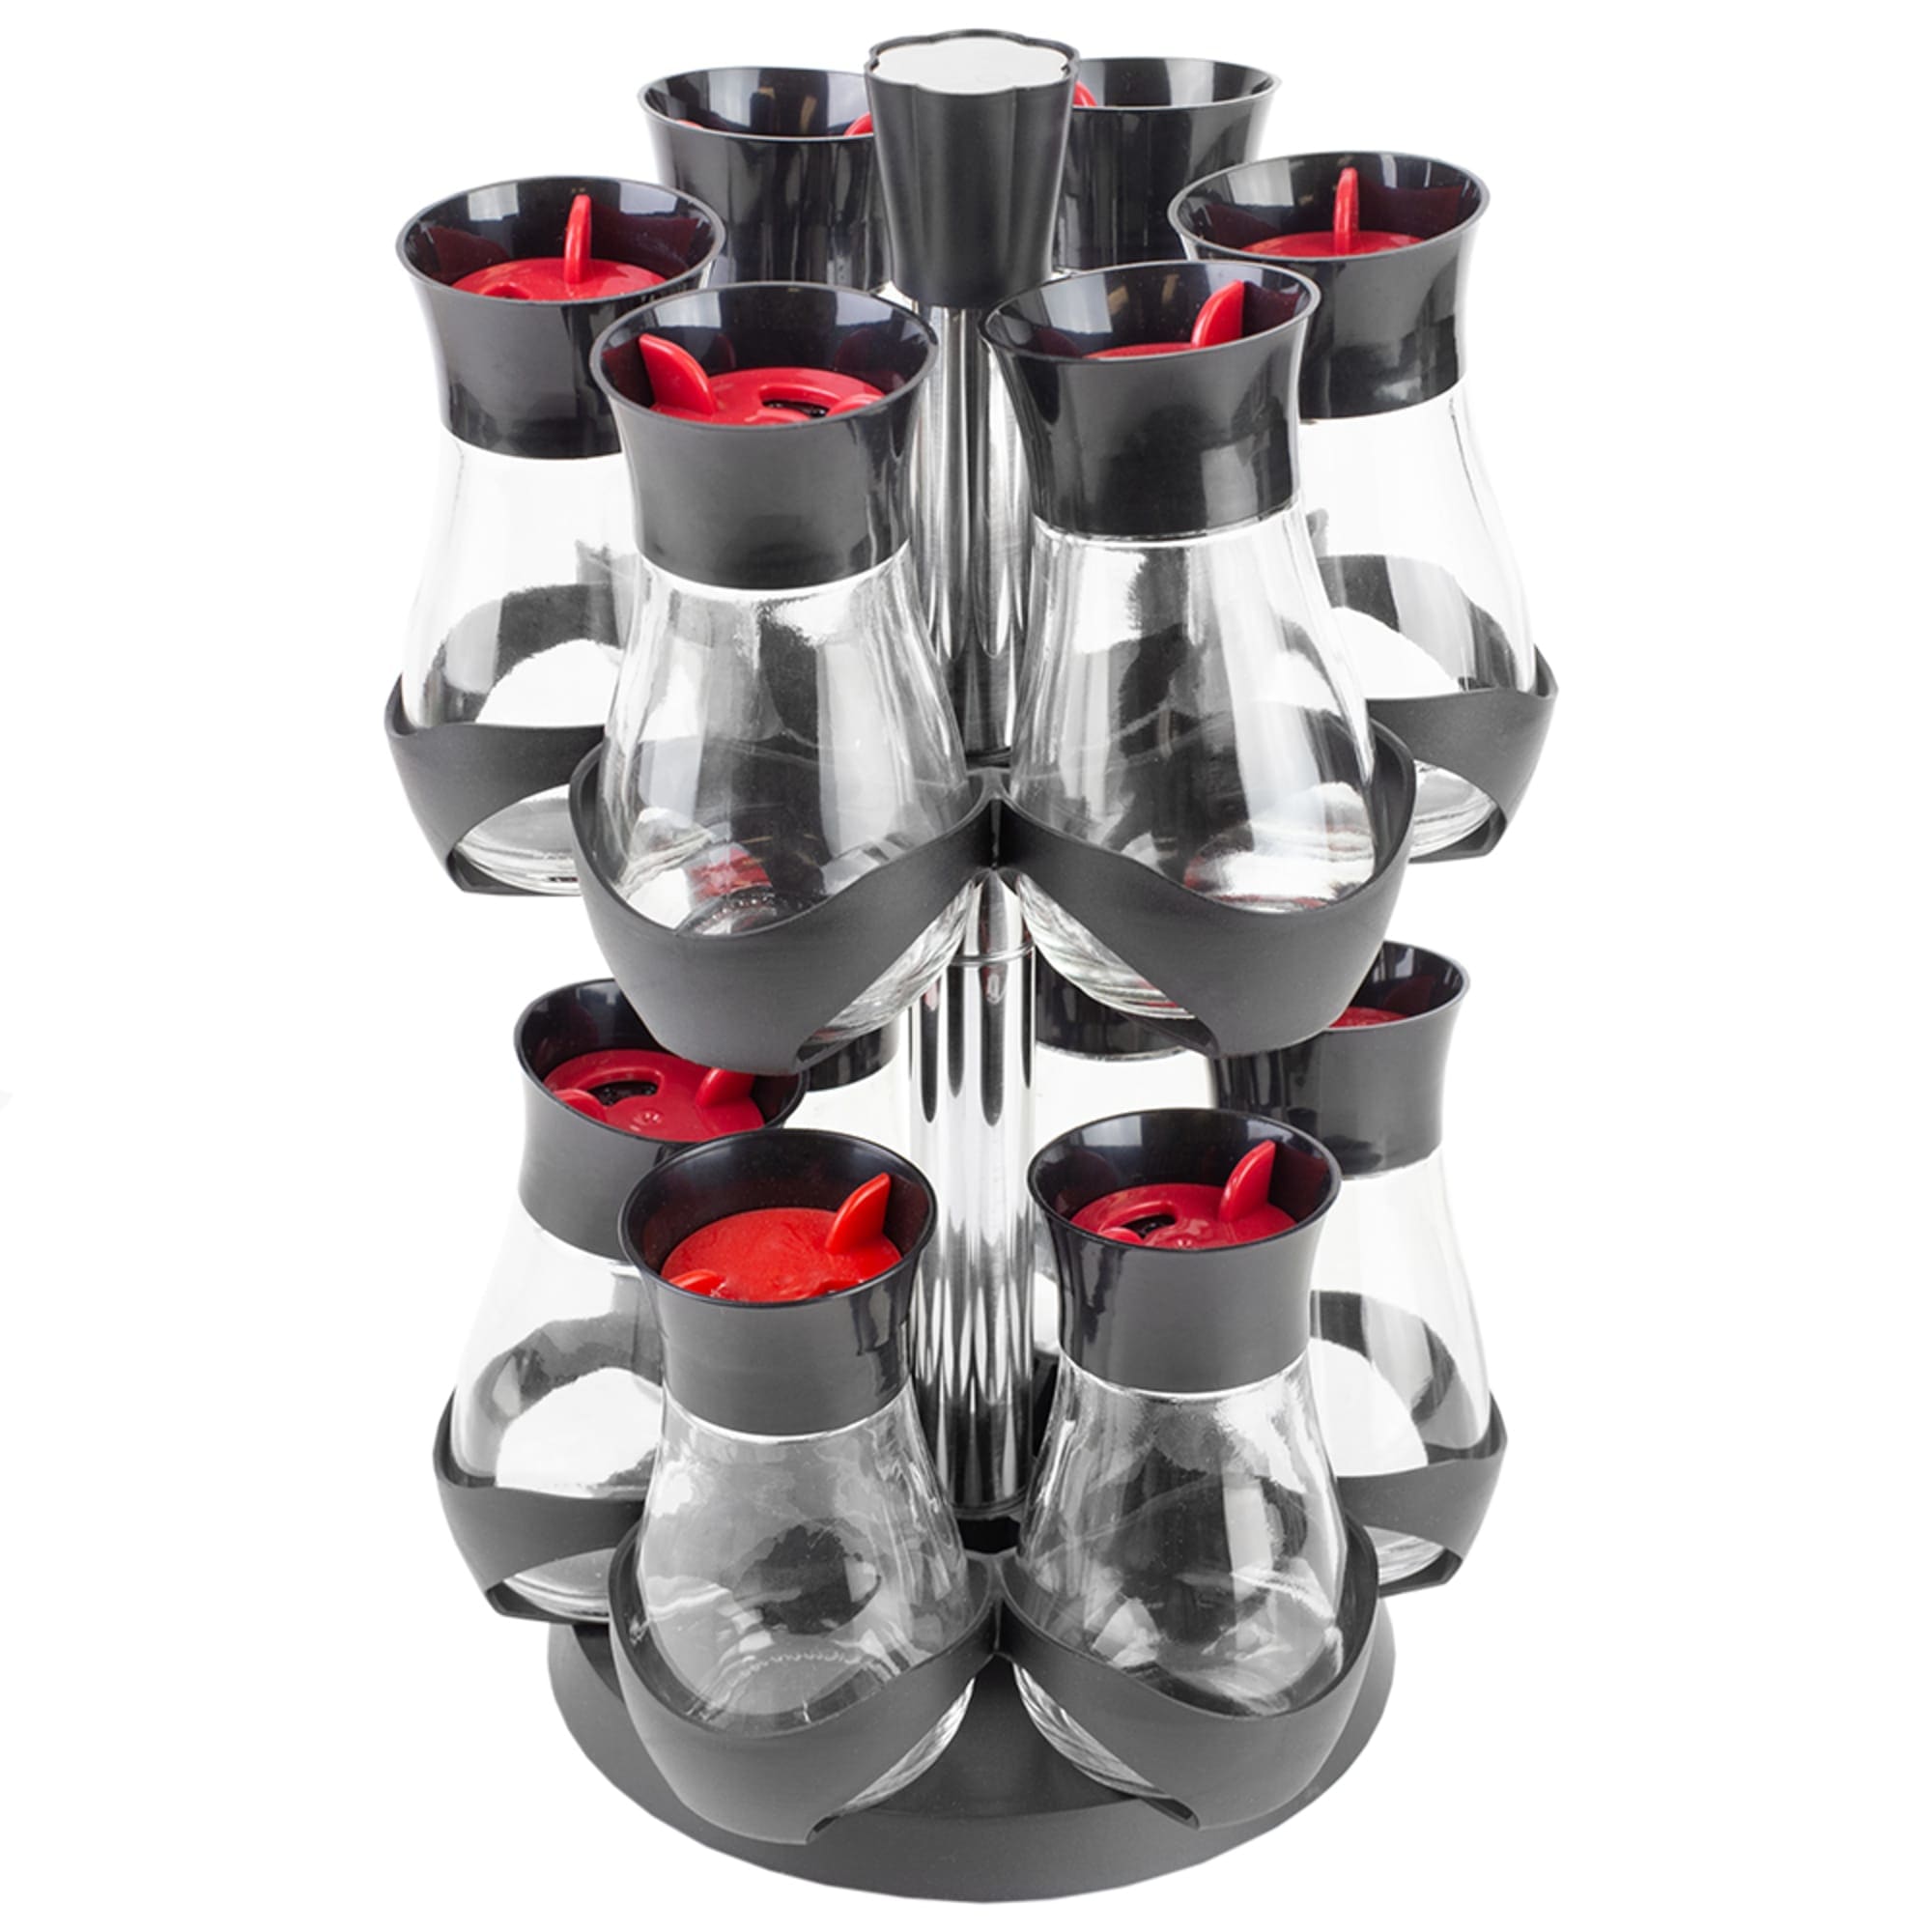 Home Basics Contemporary Gourmet Revolving 12-Jar Two Tier Spice Rack, Black $20.00 EACH, CASE PACK OF 4